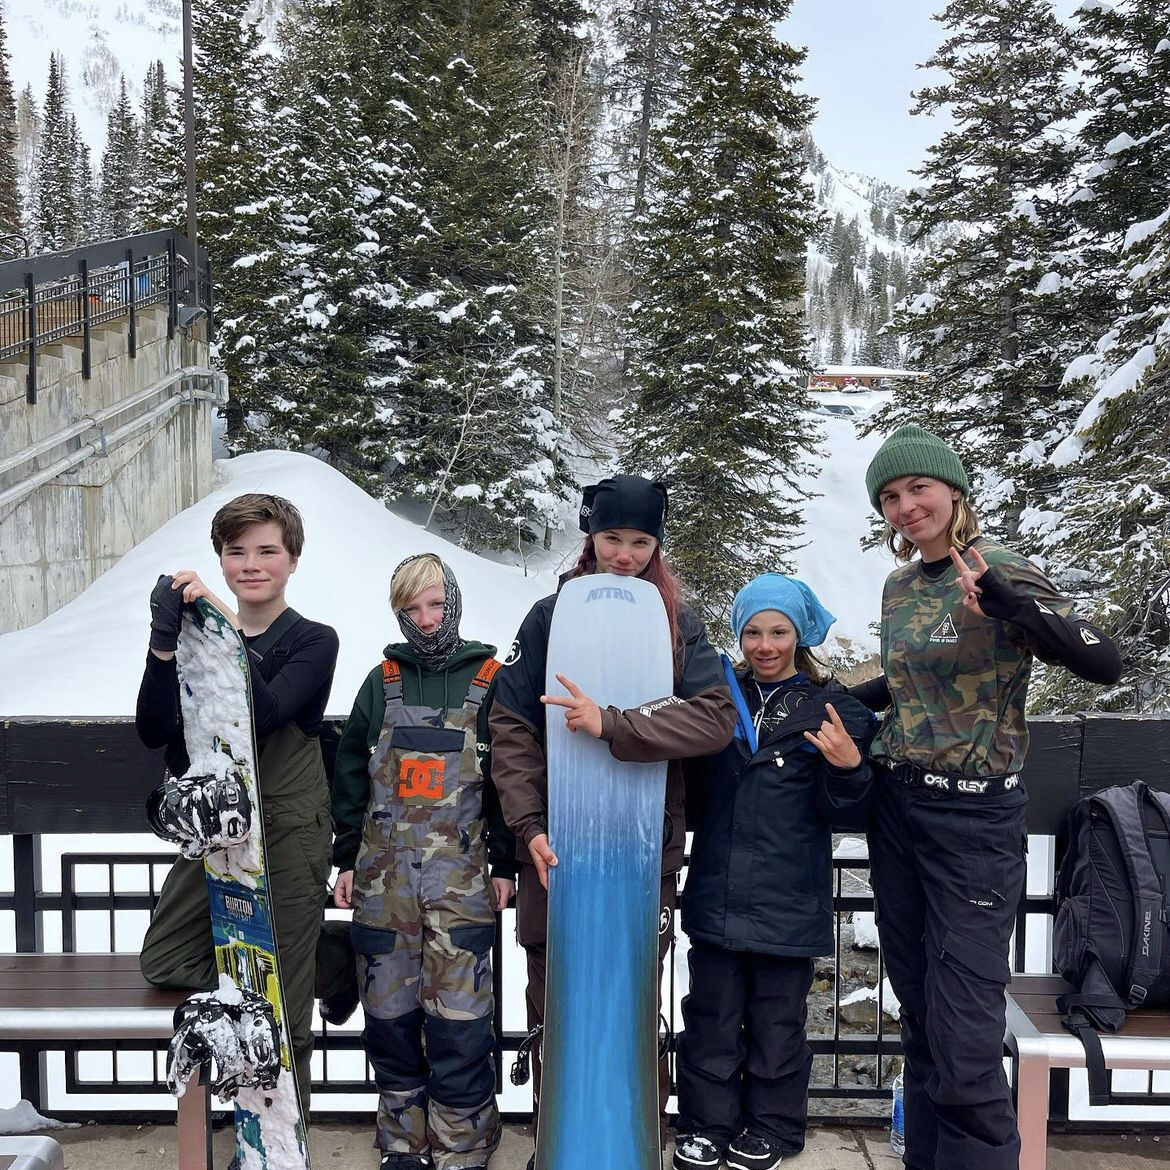 Young Riders Snowboard Team